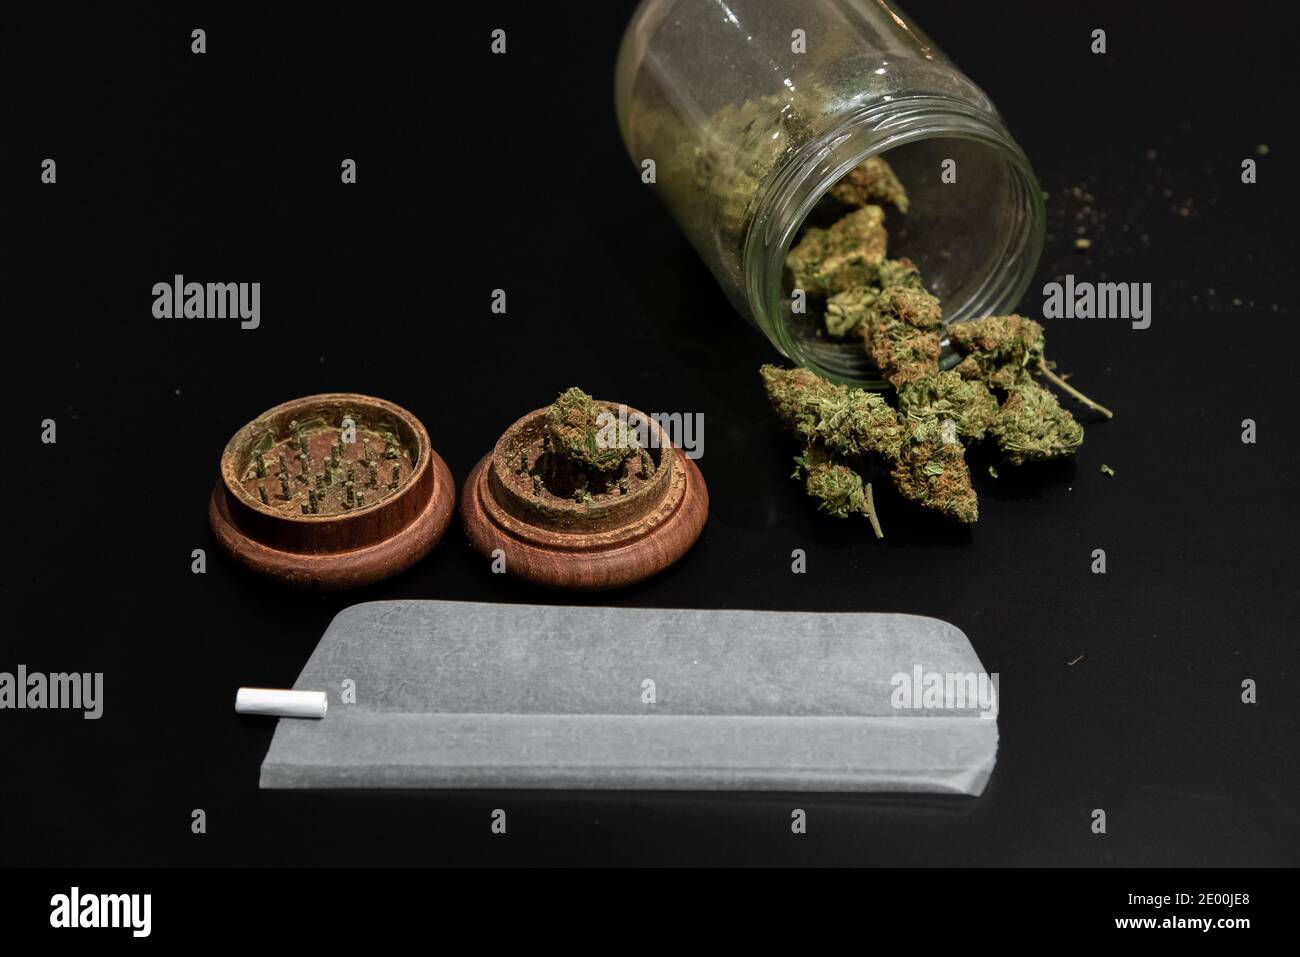 Joint, cannabis buds, grinder other smoking accessories Stock Photo